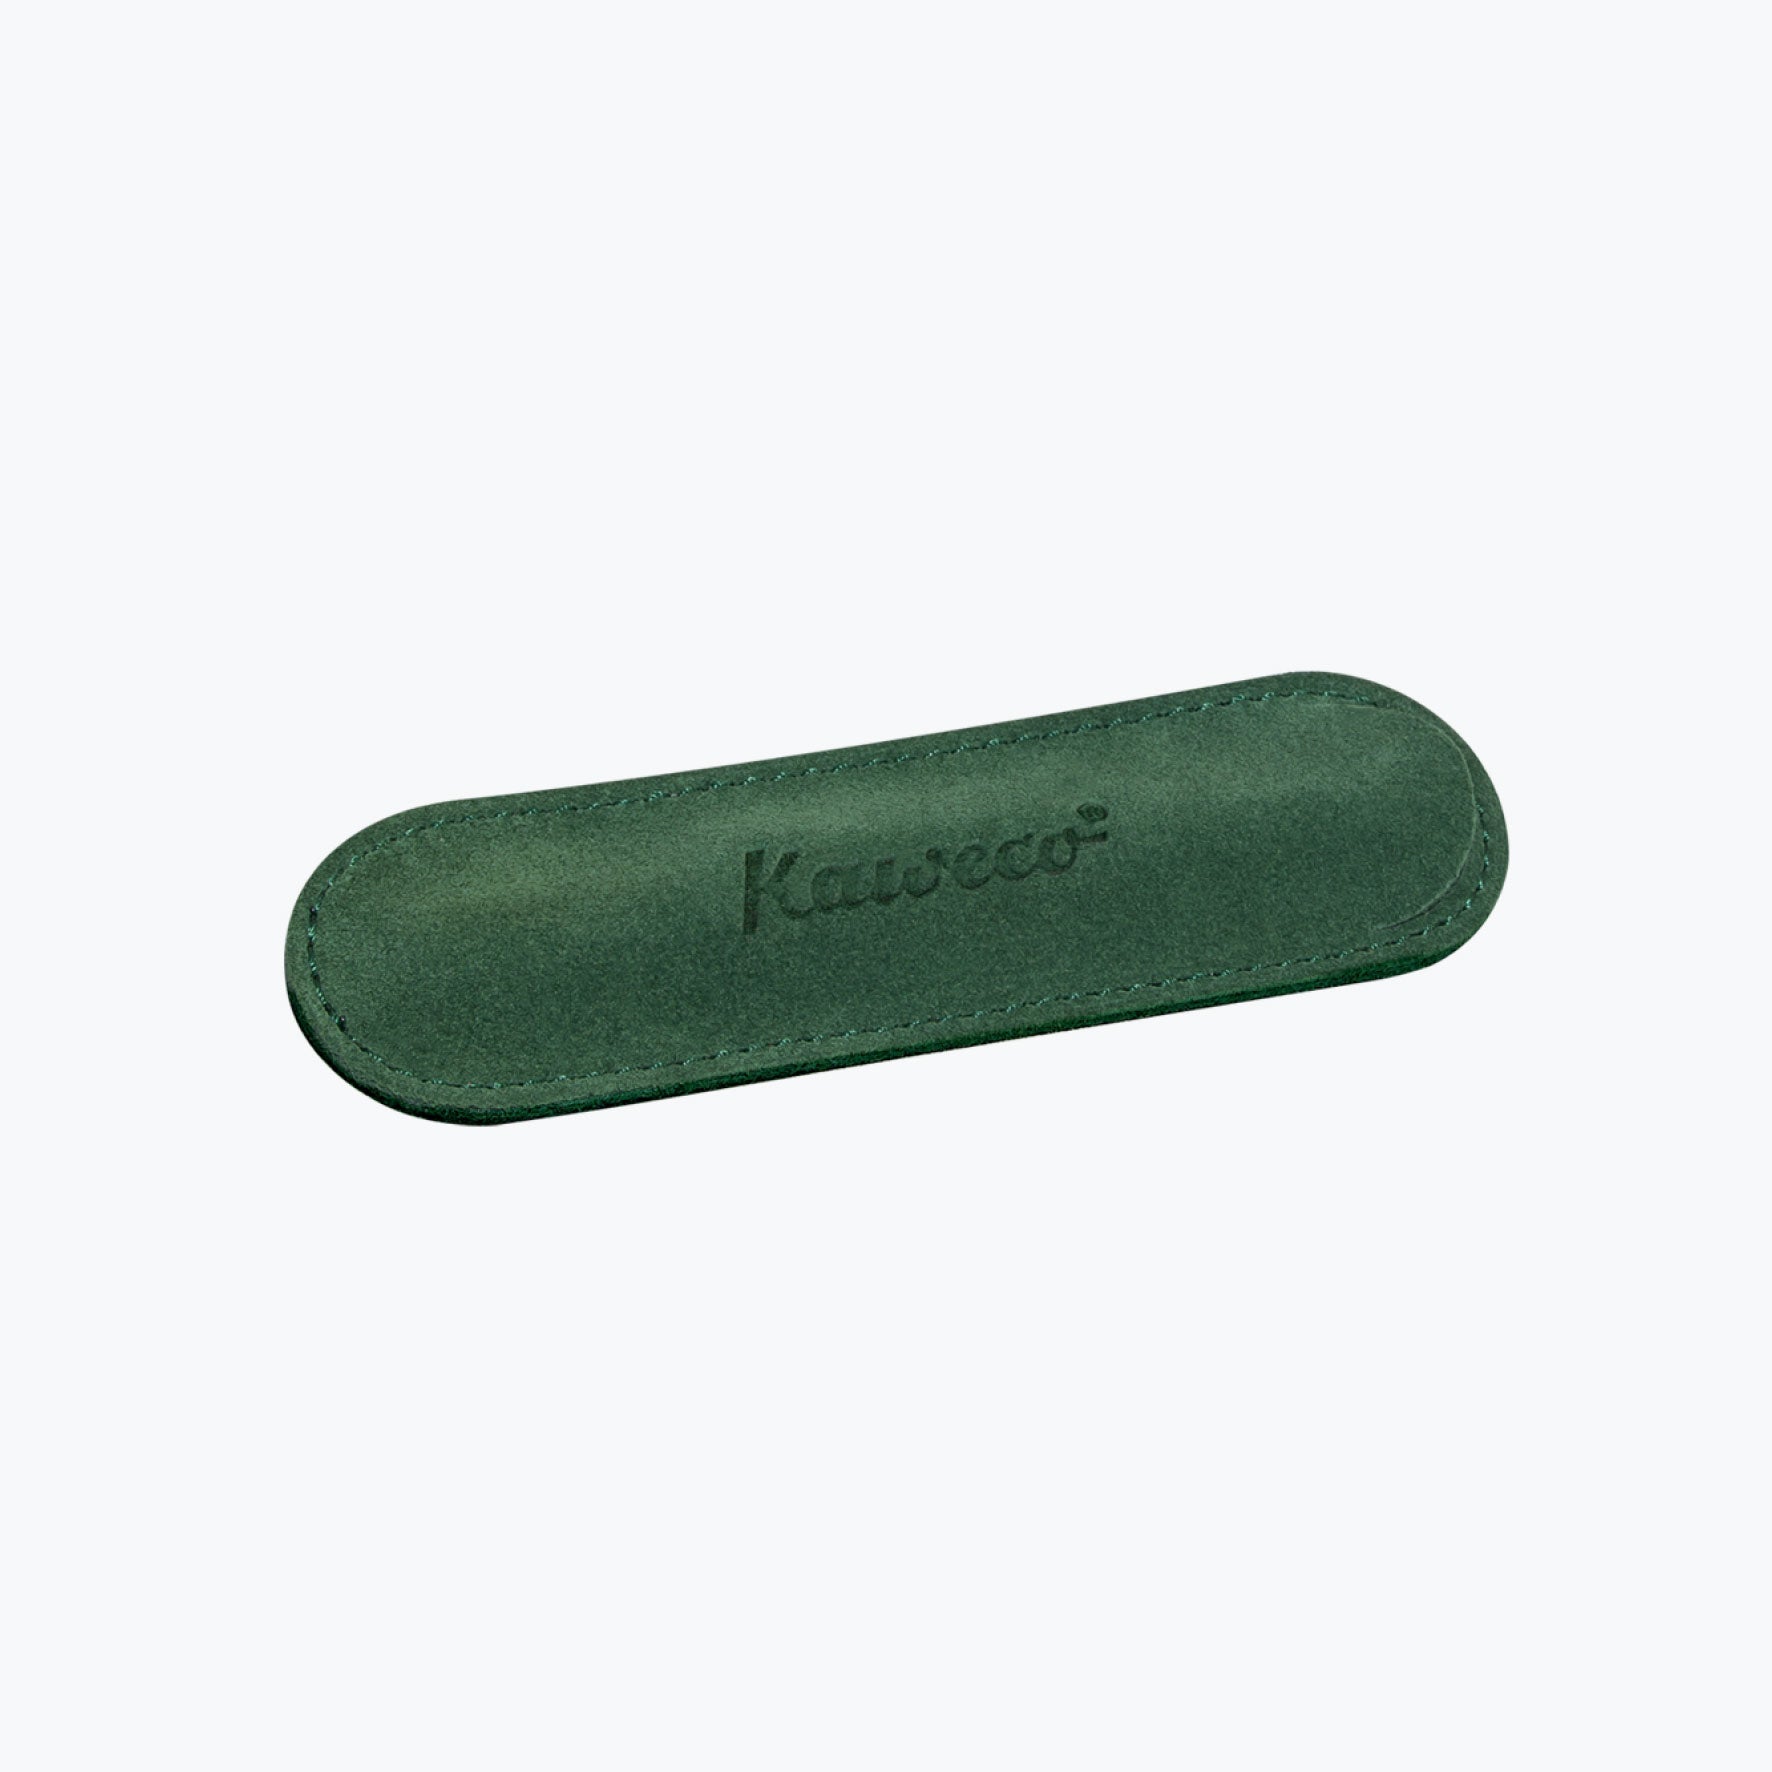 Kaweco - Pen Pouch - Sport - Eco Velour - Green - One